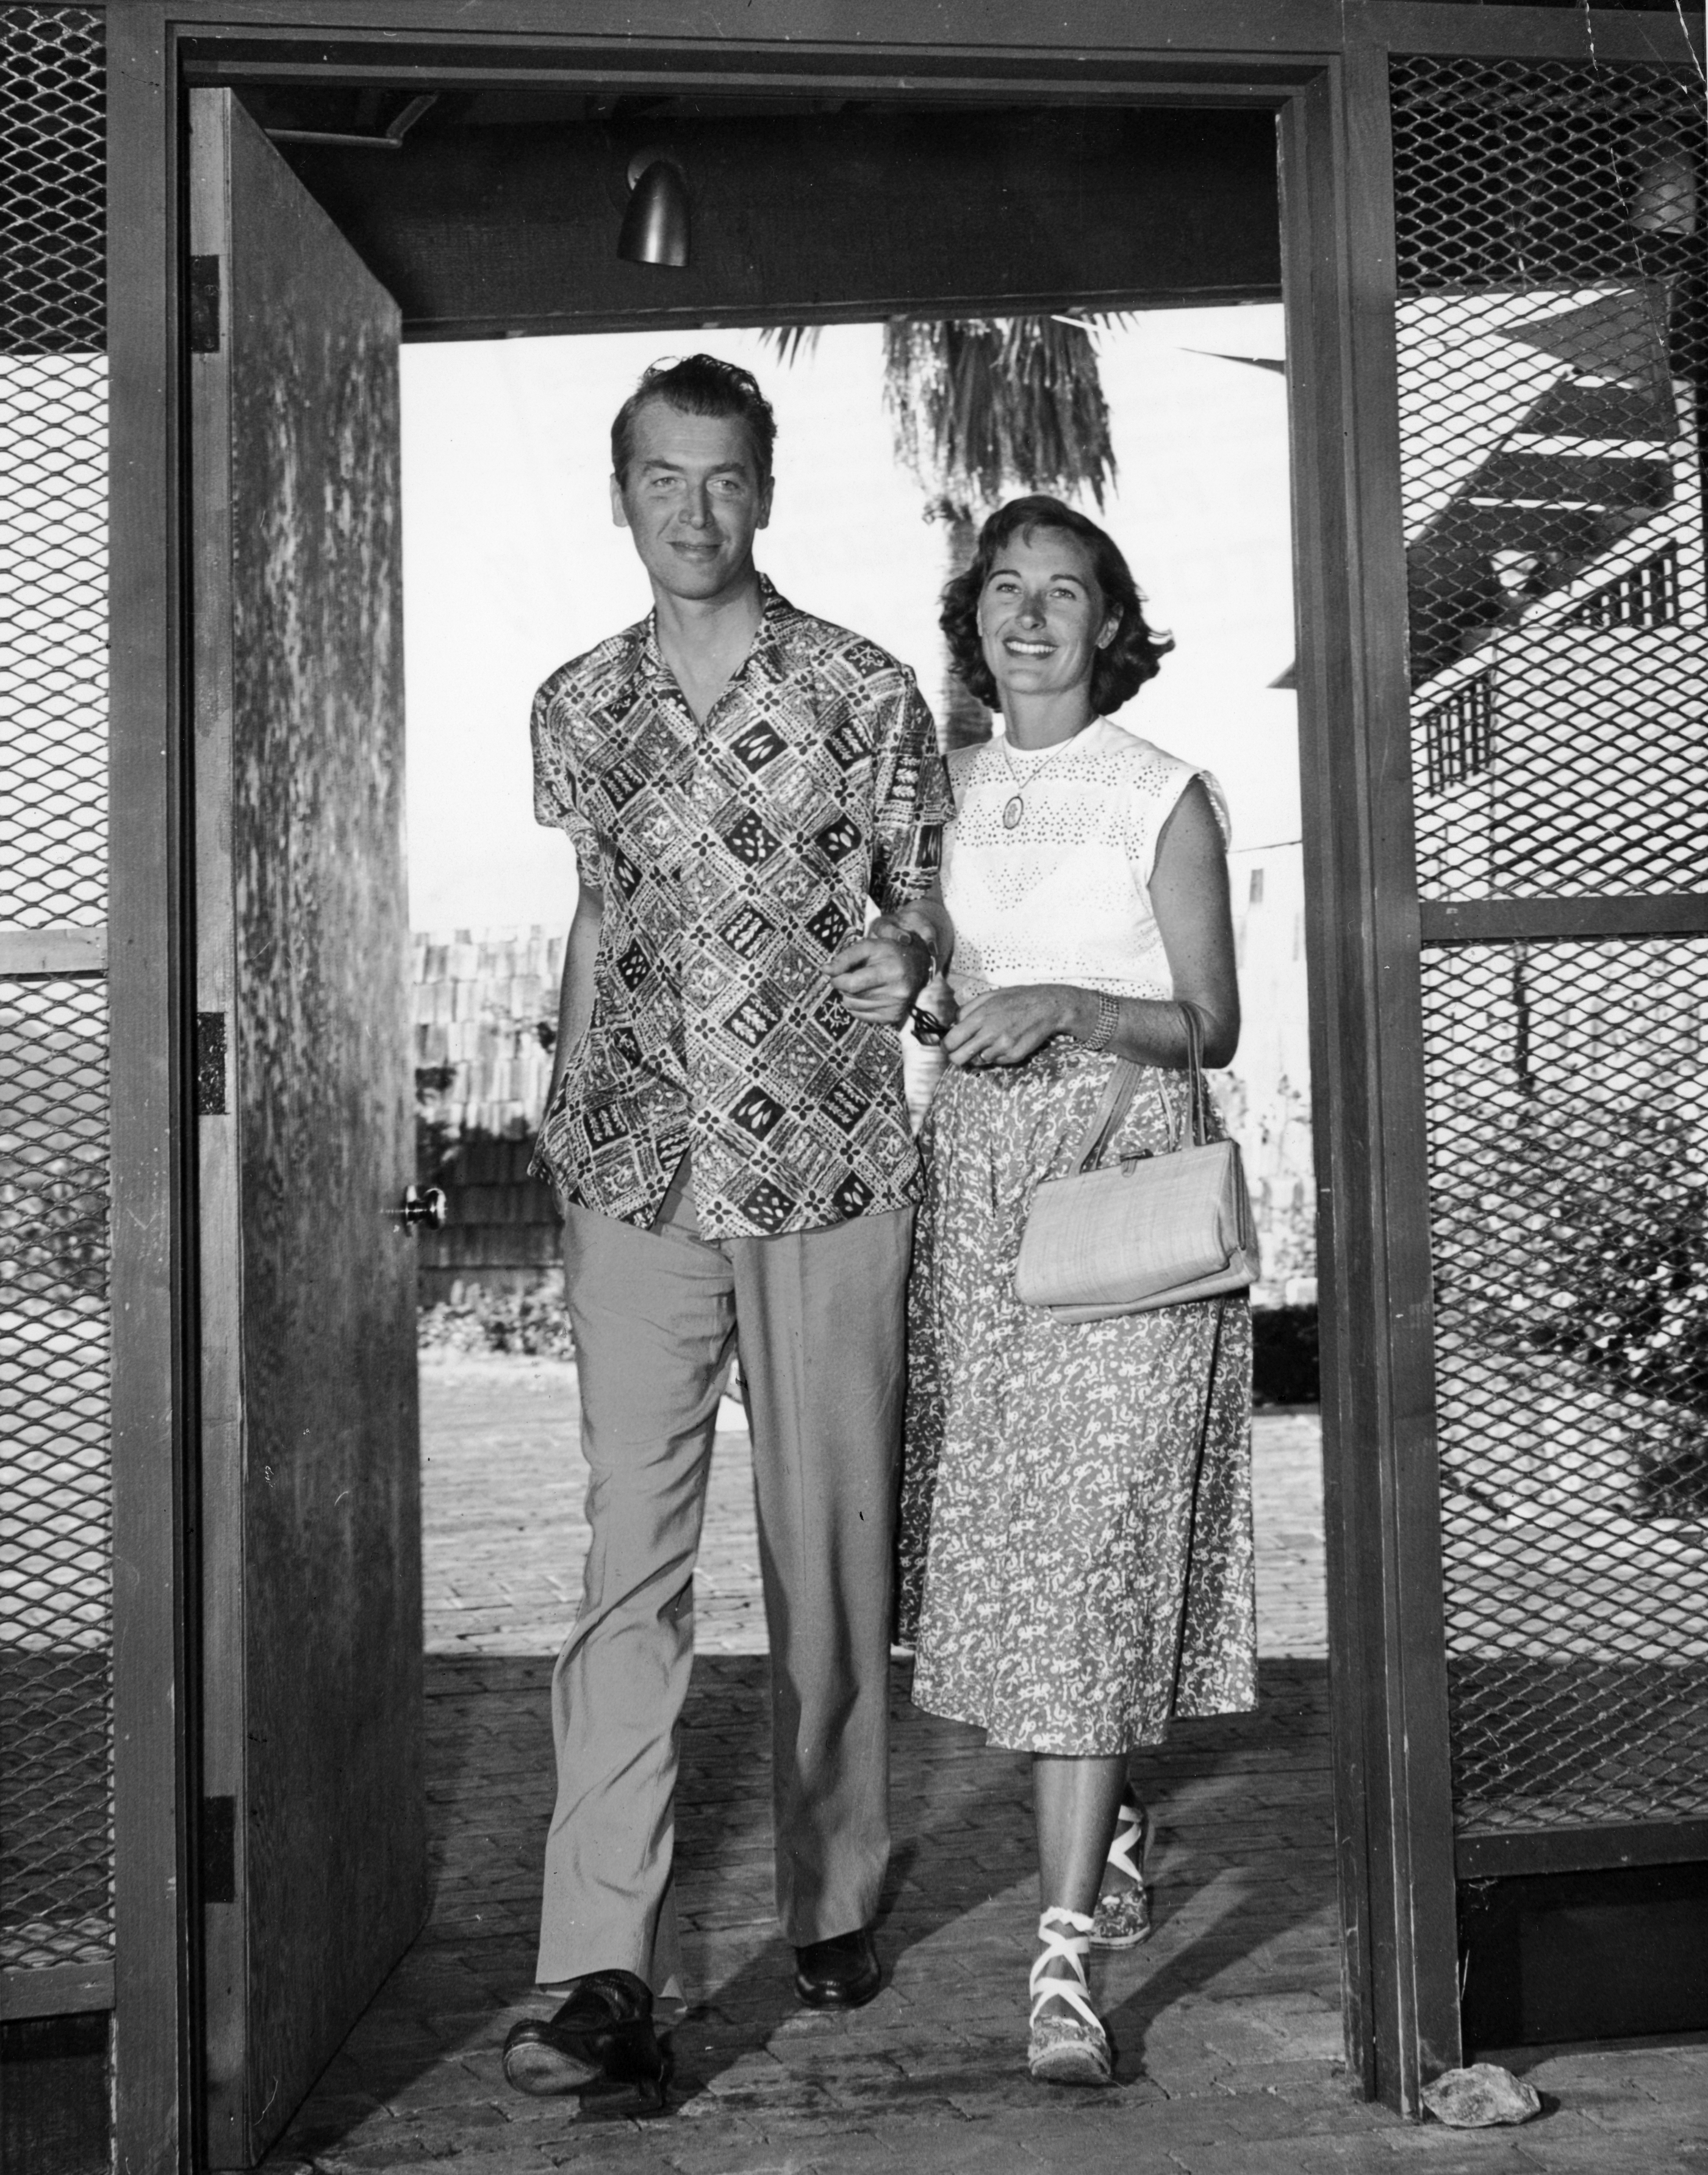 James Stewart and Gloria Hatrick McLean in Palm Desert, California in 1955 | Source: Getty Images